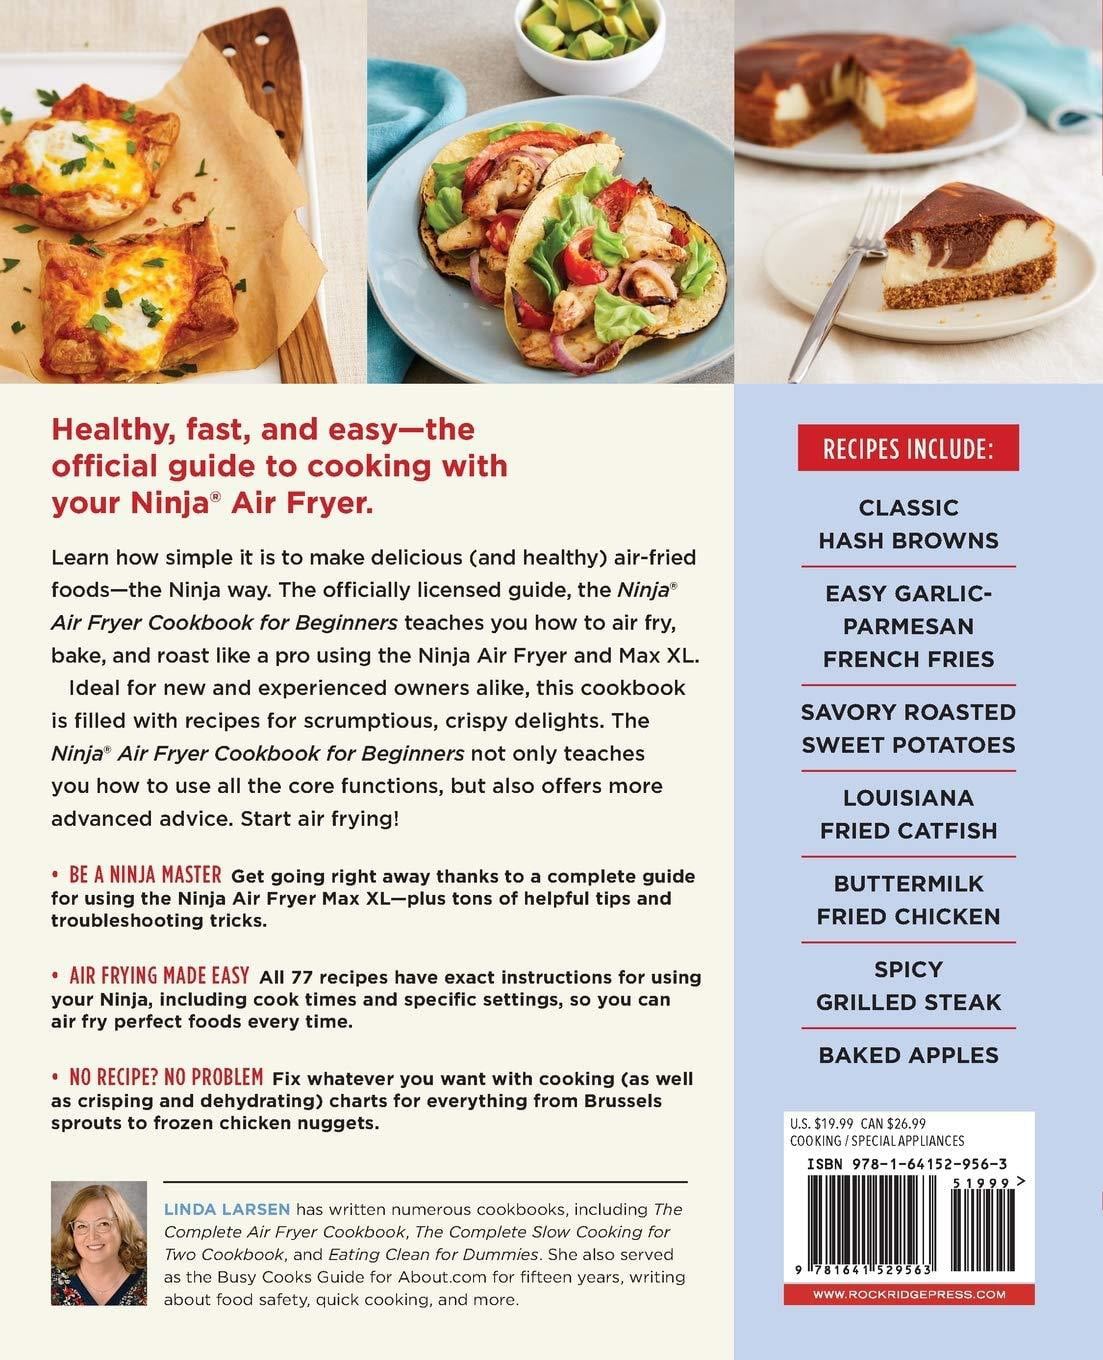 Ninja Air Fryer Cookbook for Beginners: 115+ Fast, Healthy, and